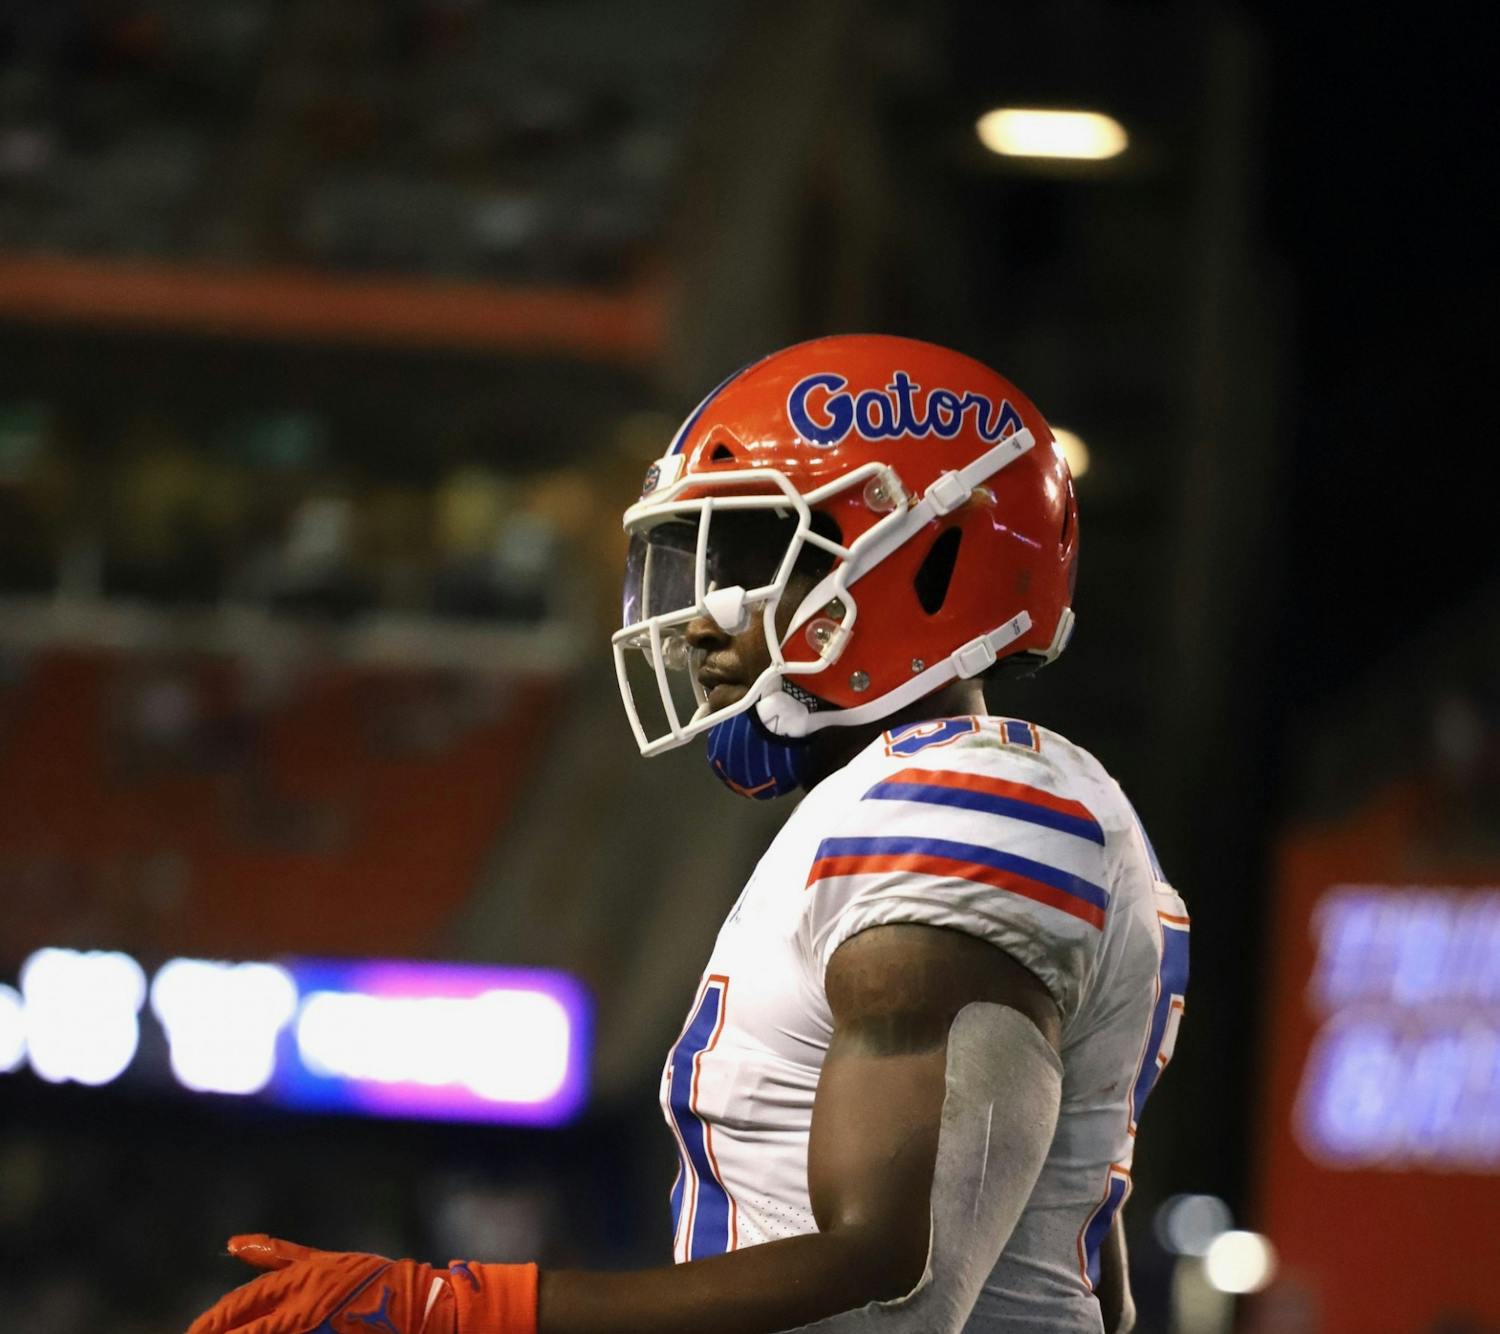 Florida's Ventrell Miller, pictured on the field against Florida Atlantic on Sept. 4, will miss the season after surgery for a torn biceps tendon.